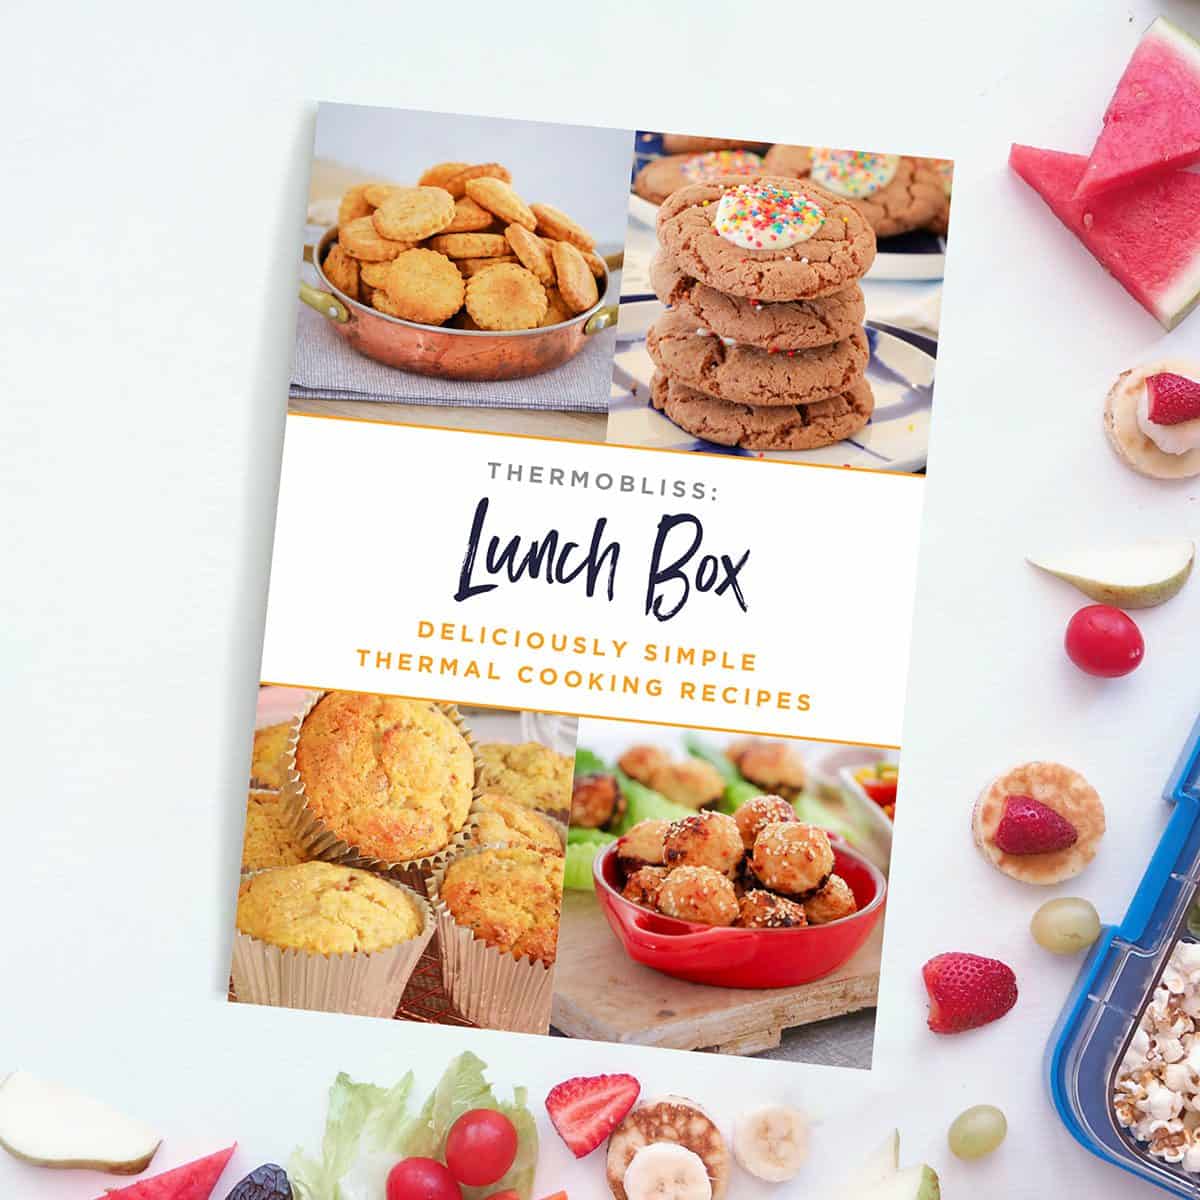 The cover of a recipe book - Thermobliss Lunch Box